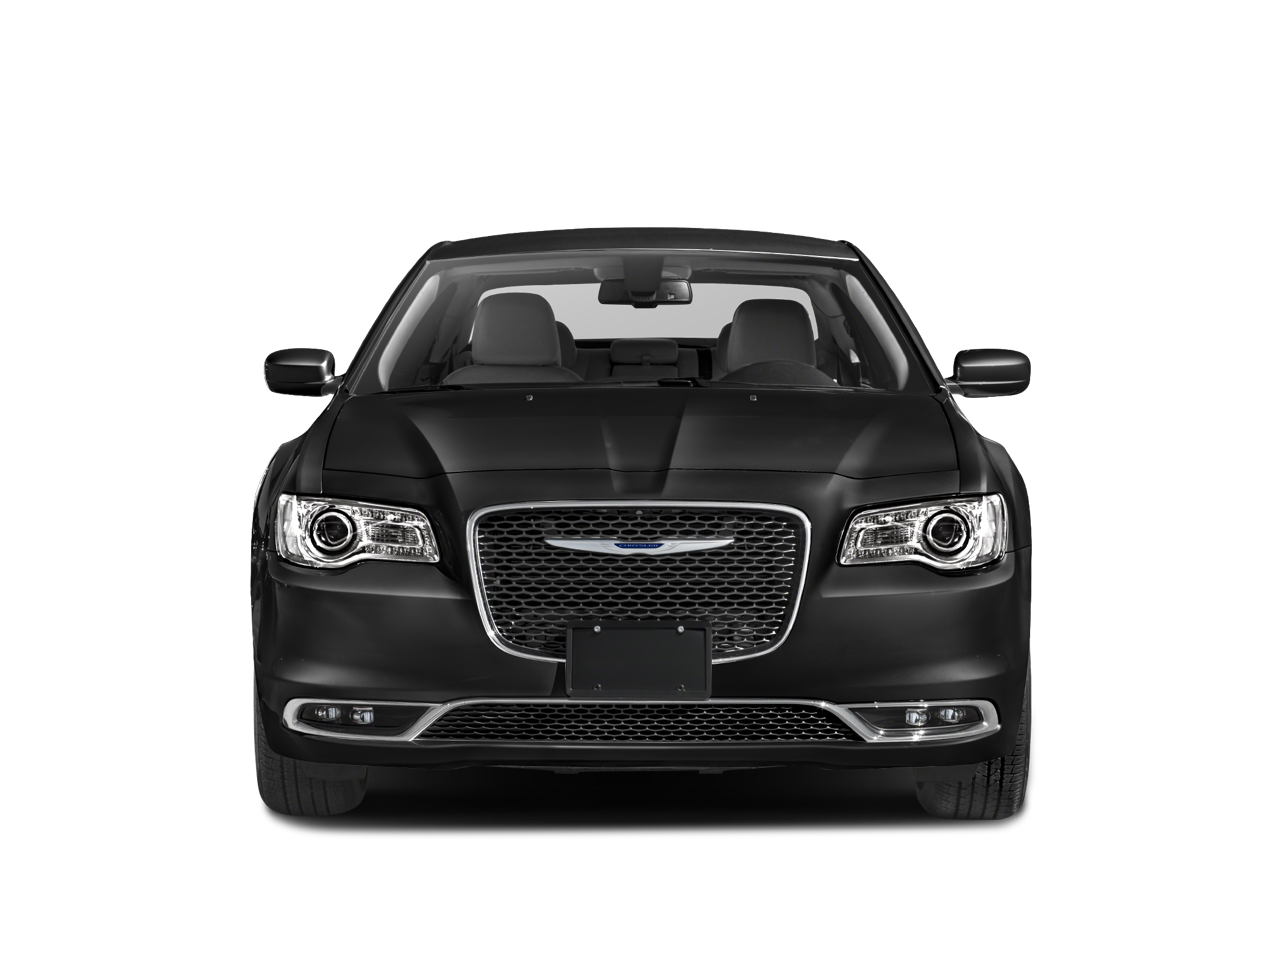 2021 Chrysler 300 S 1 OWNER! CLEAN CARFAX!